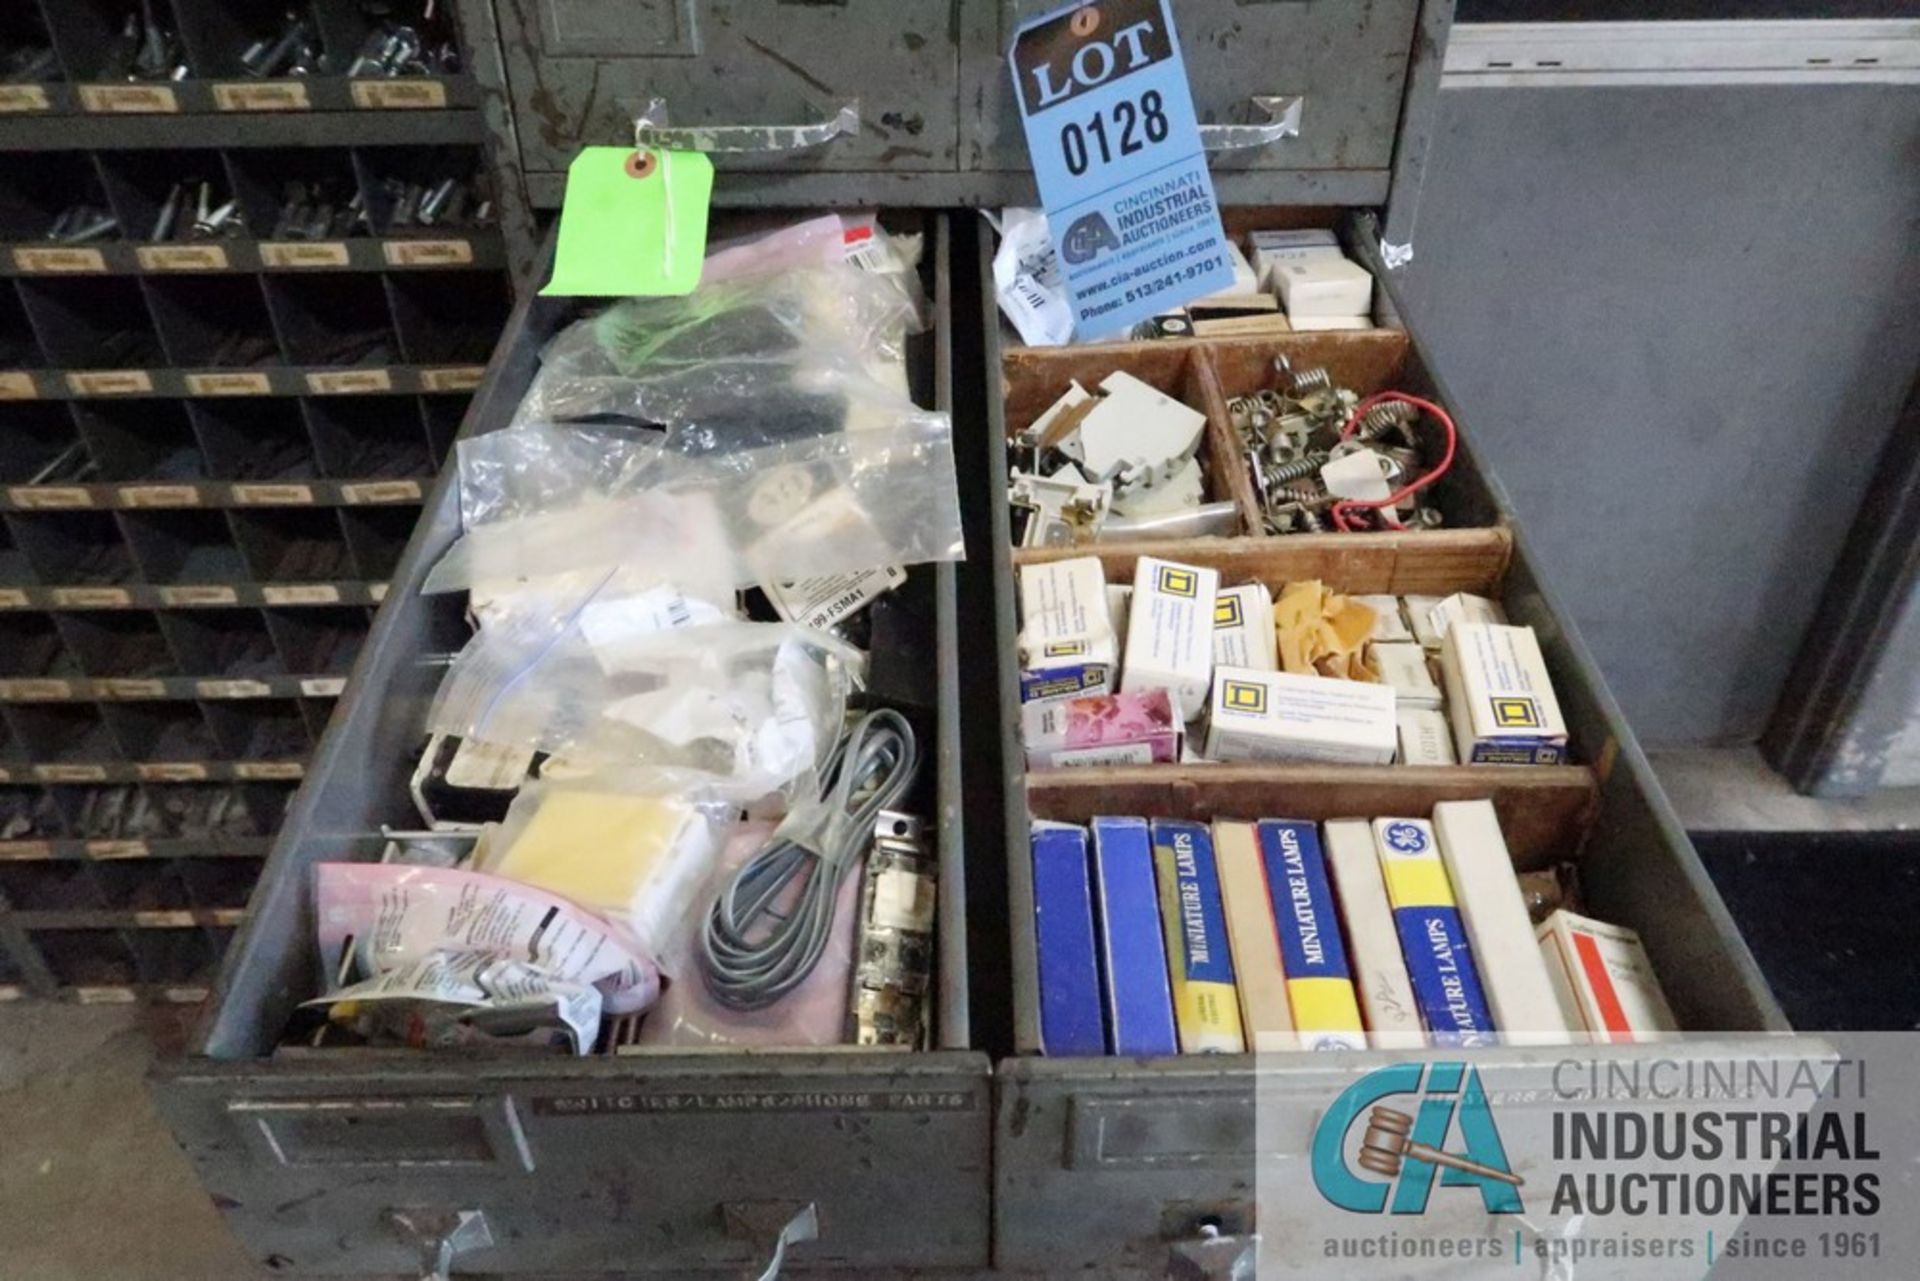 (LOT) MISCELLANEOUS ELECTRICAL, PNEUMATIC, AND MACHINE COMPONENTS WITH CABINETS - Image 3 of 15